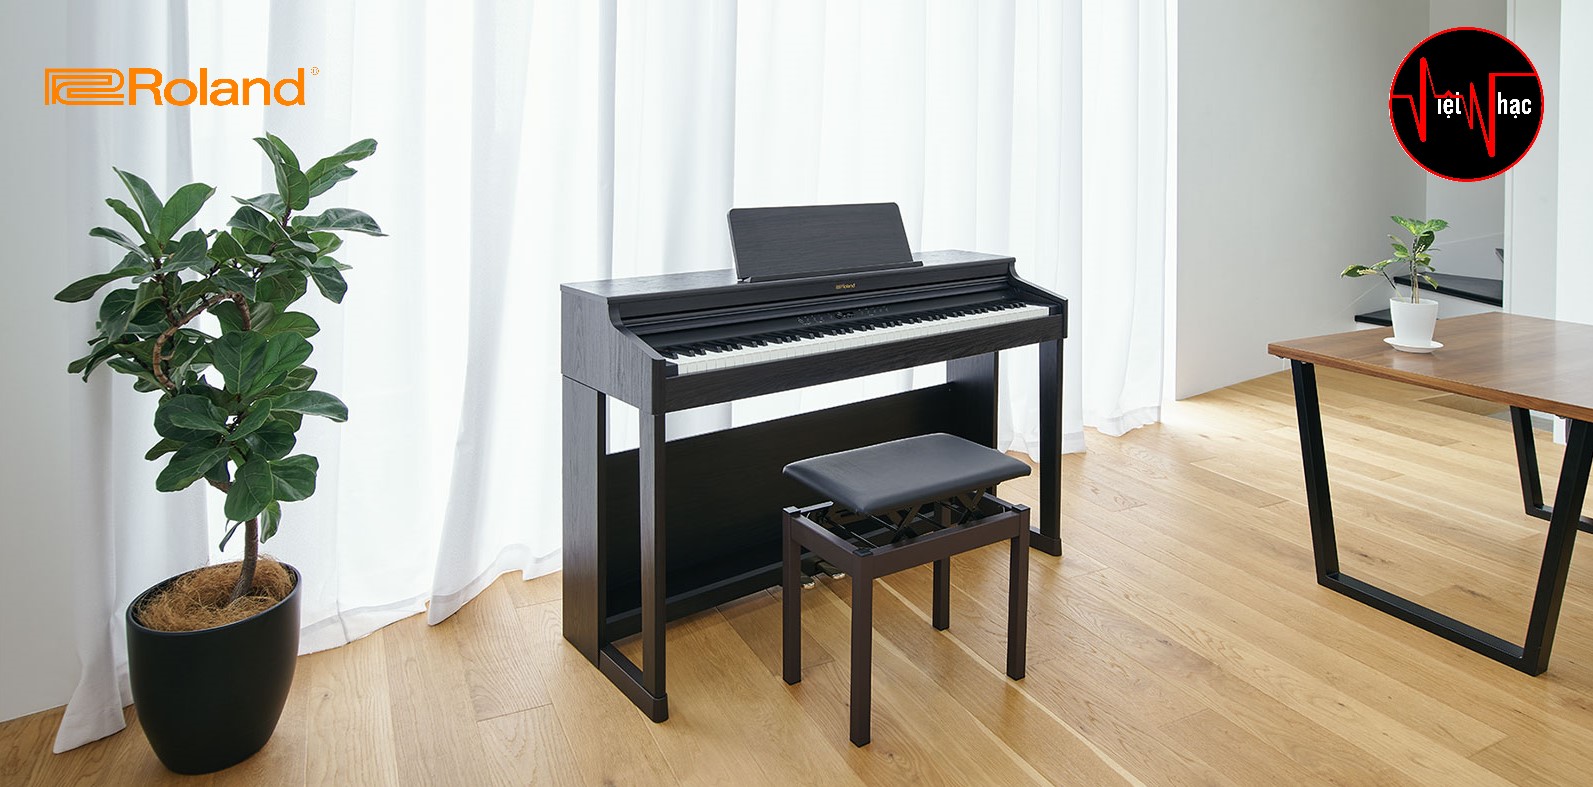 Piano Điện Roland RP701